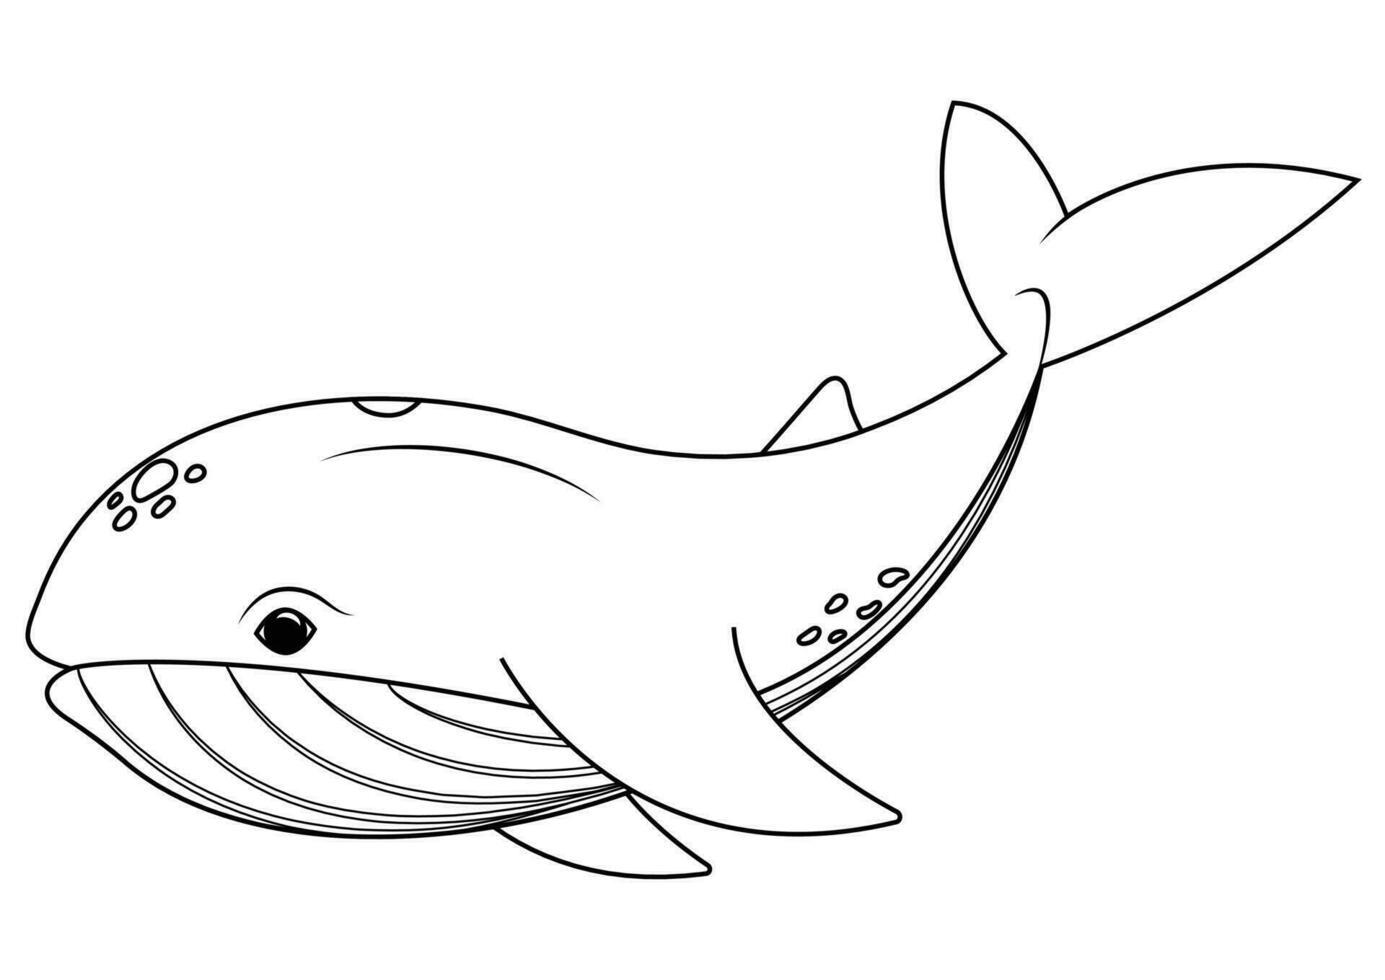 Black and white whale cartoon character vector. Coloring page of cartoon whale vector